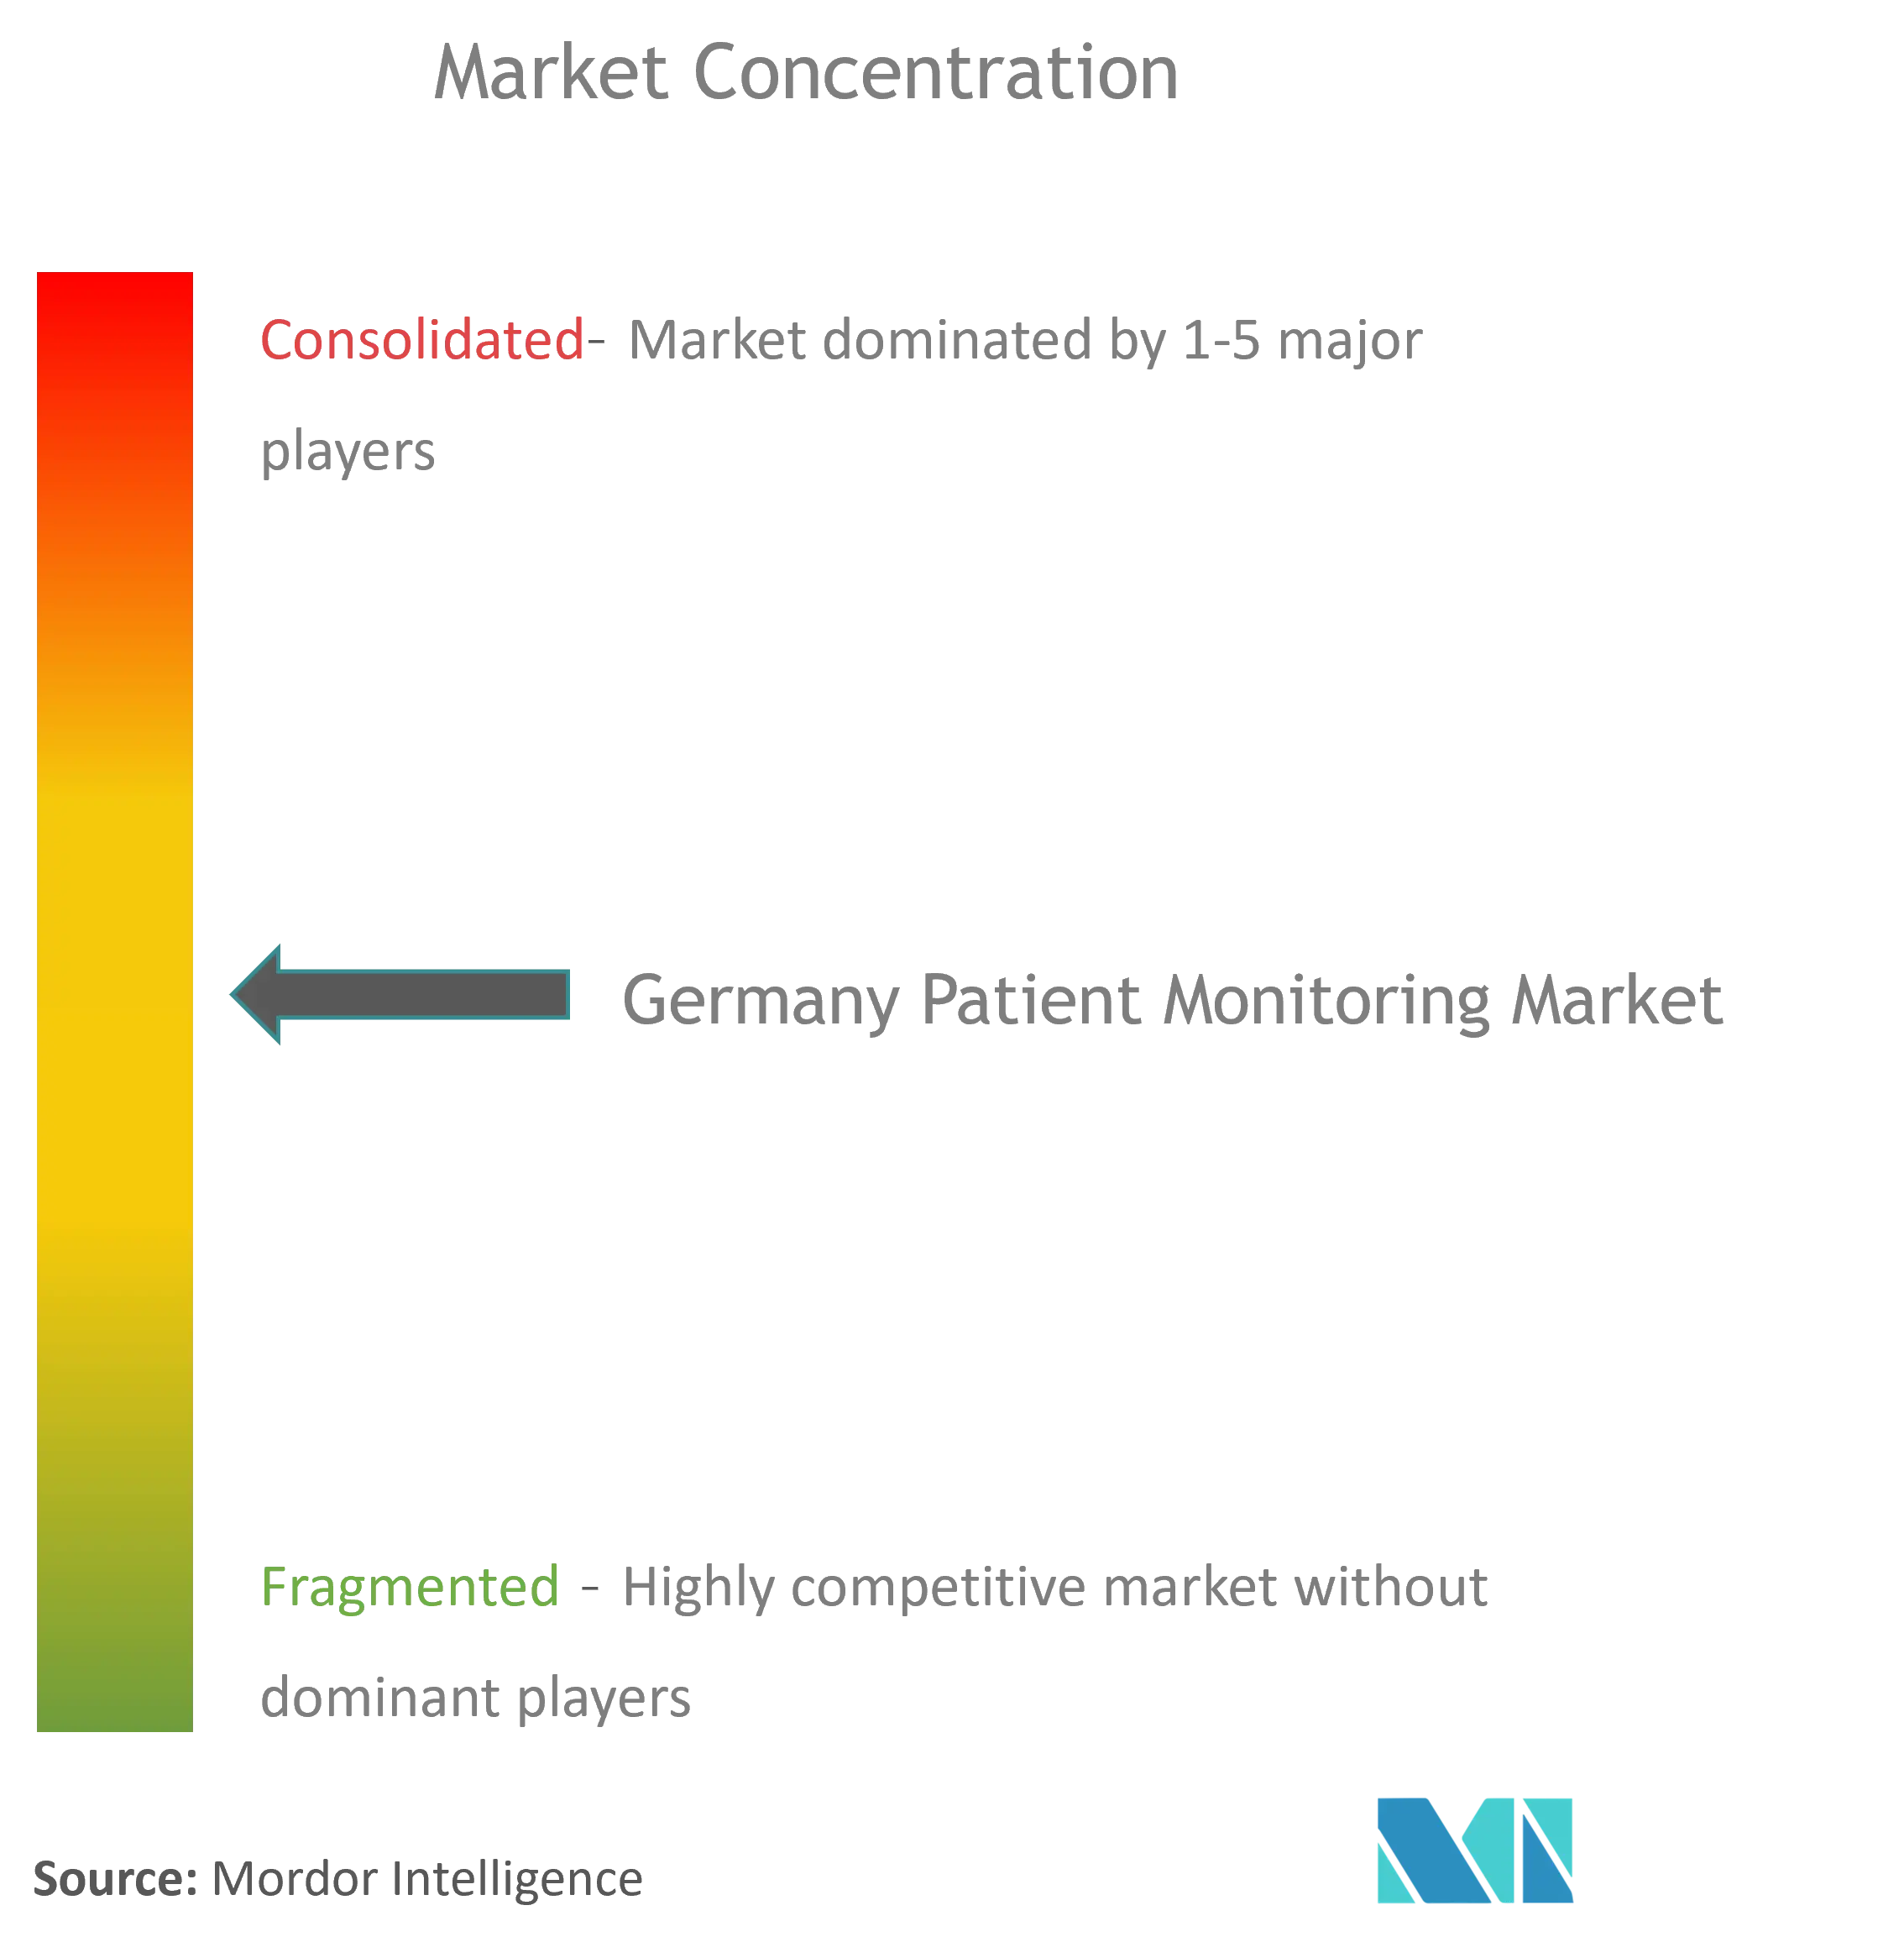 Germany Patient Monitoring Market Concentration